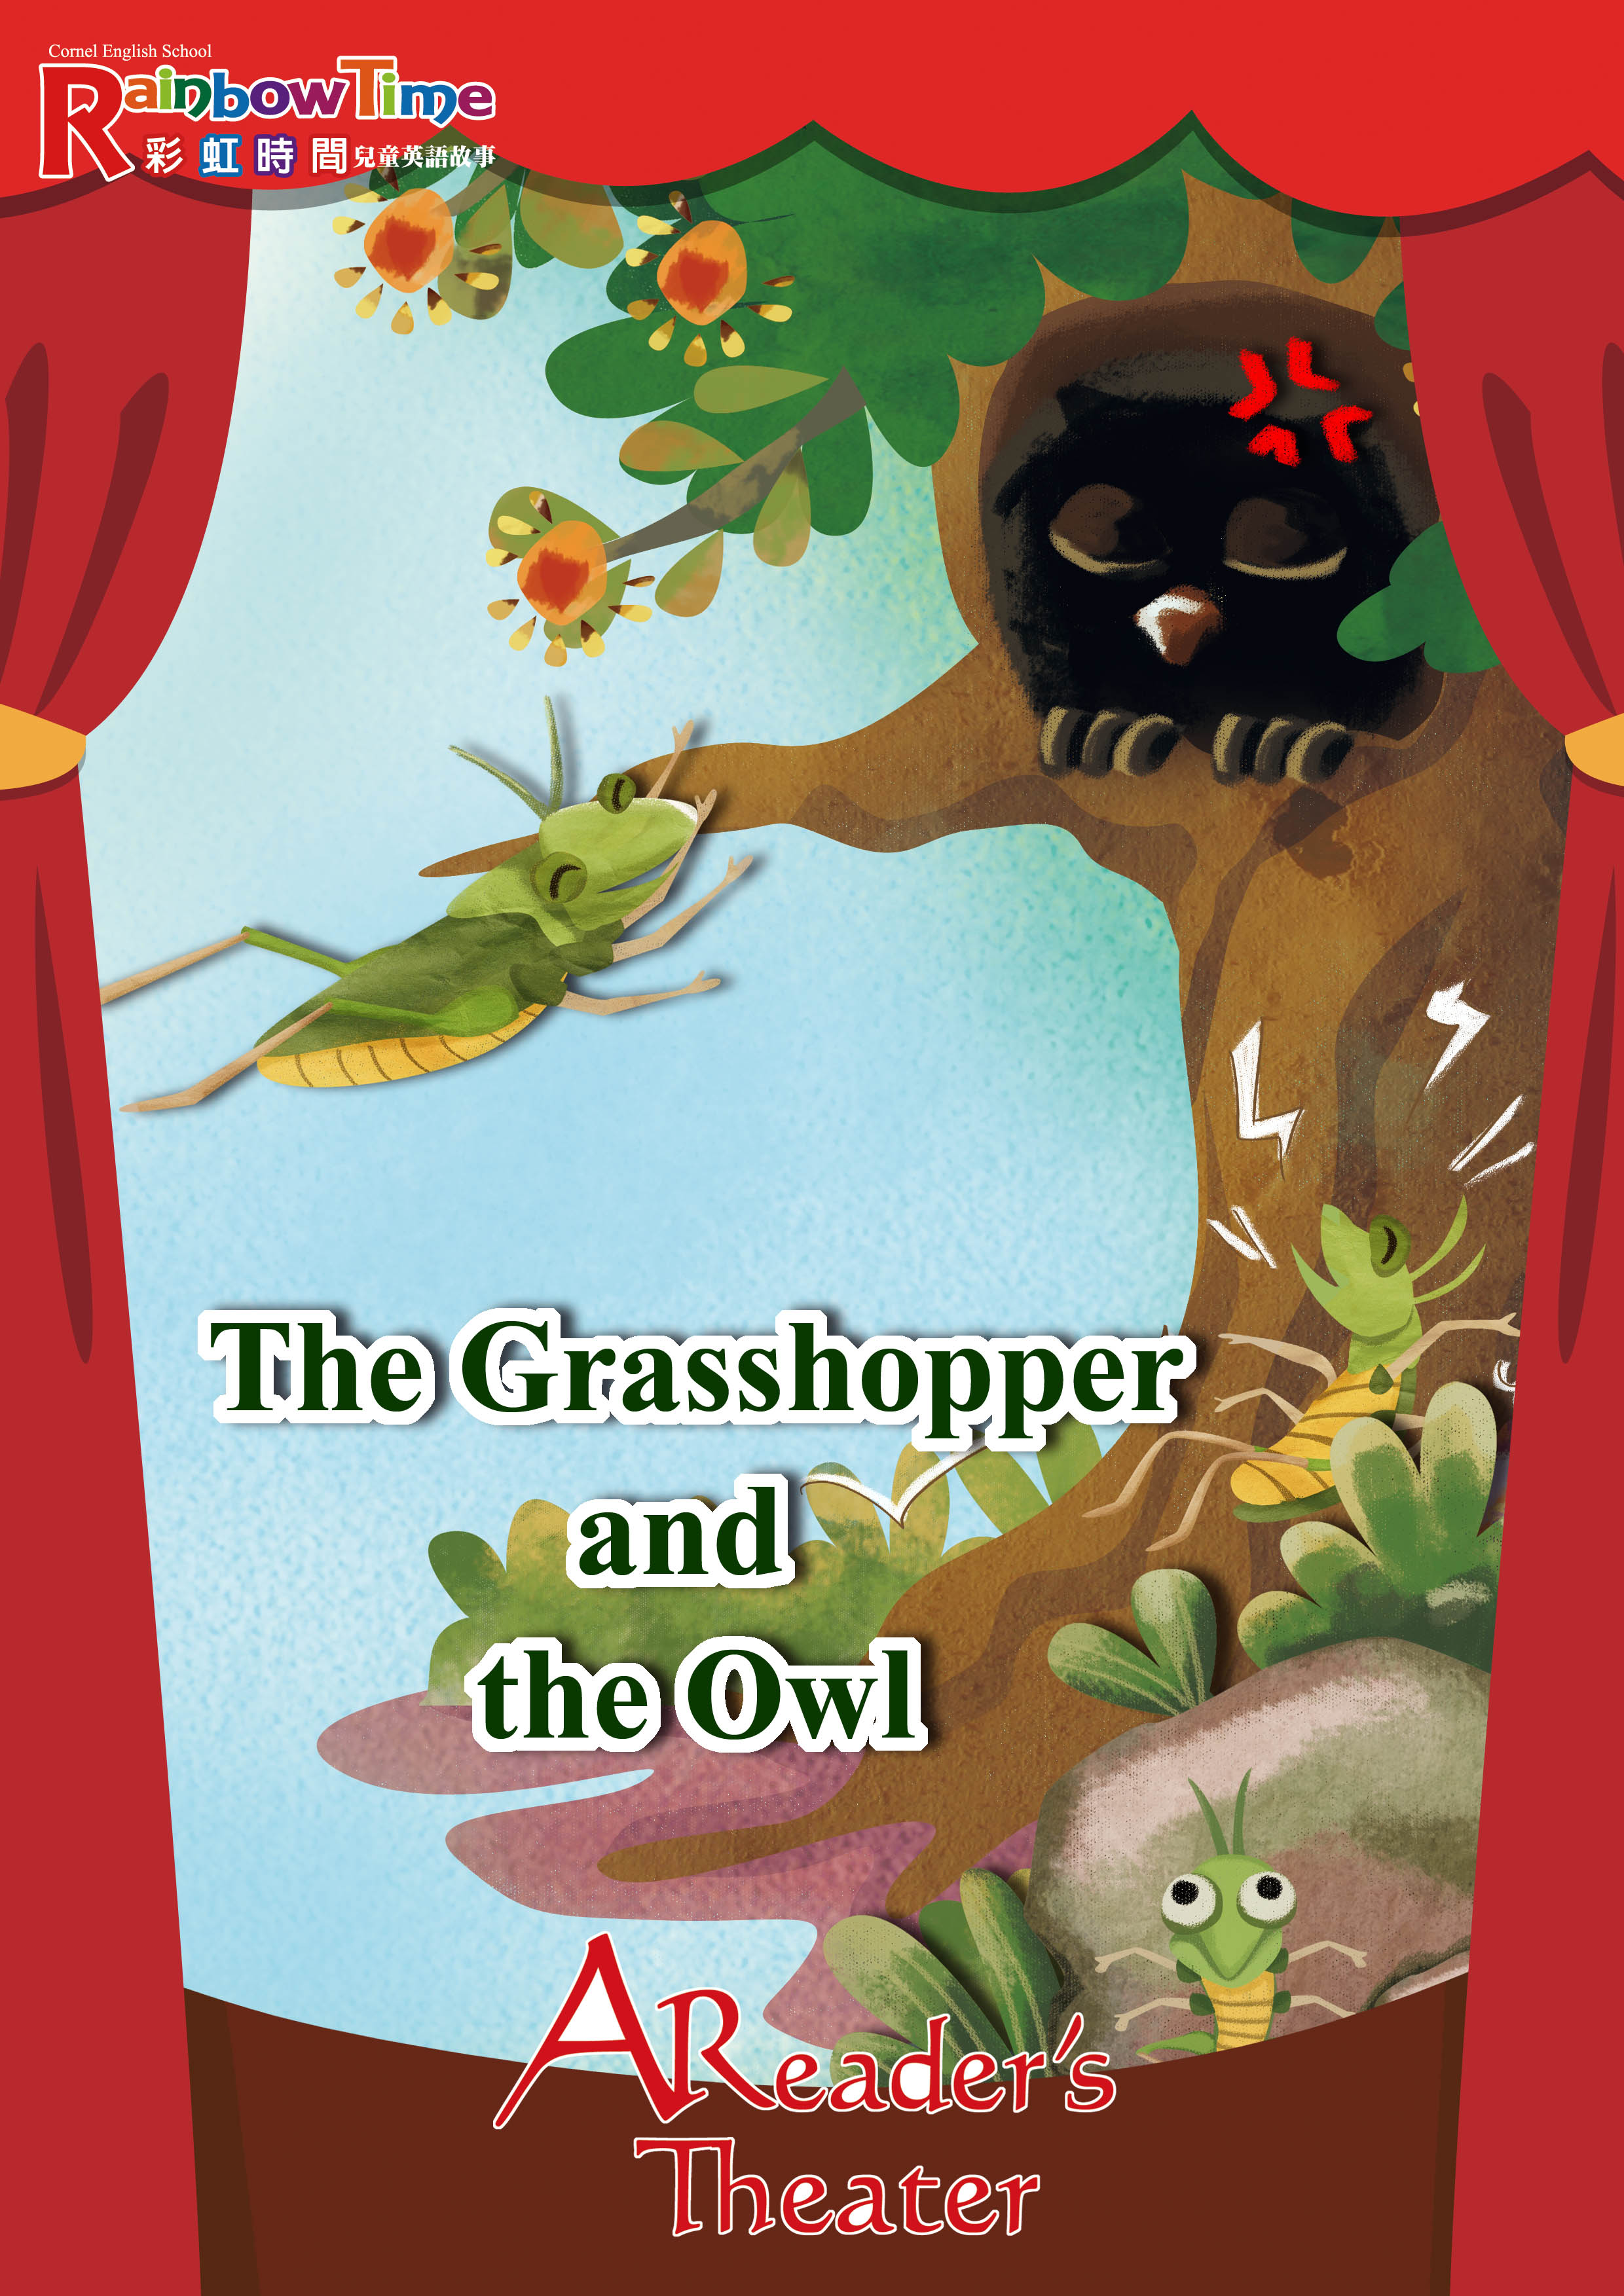 Reader's Theater: The Grasshopper and the Owl